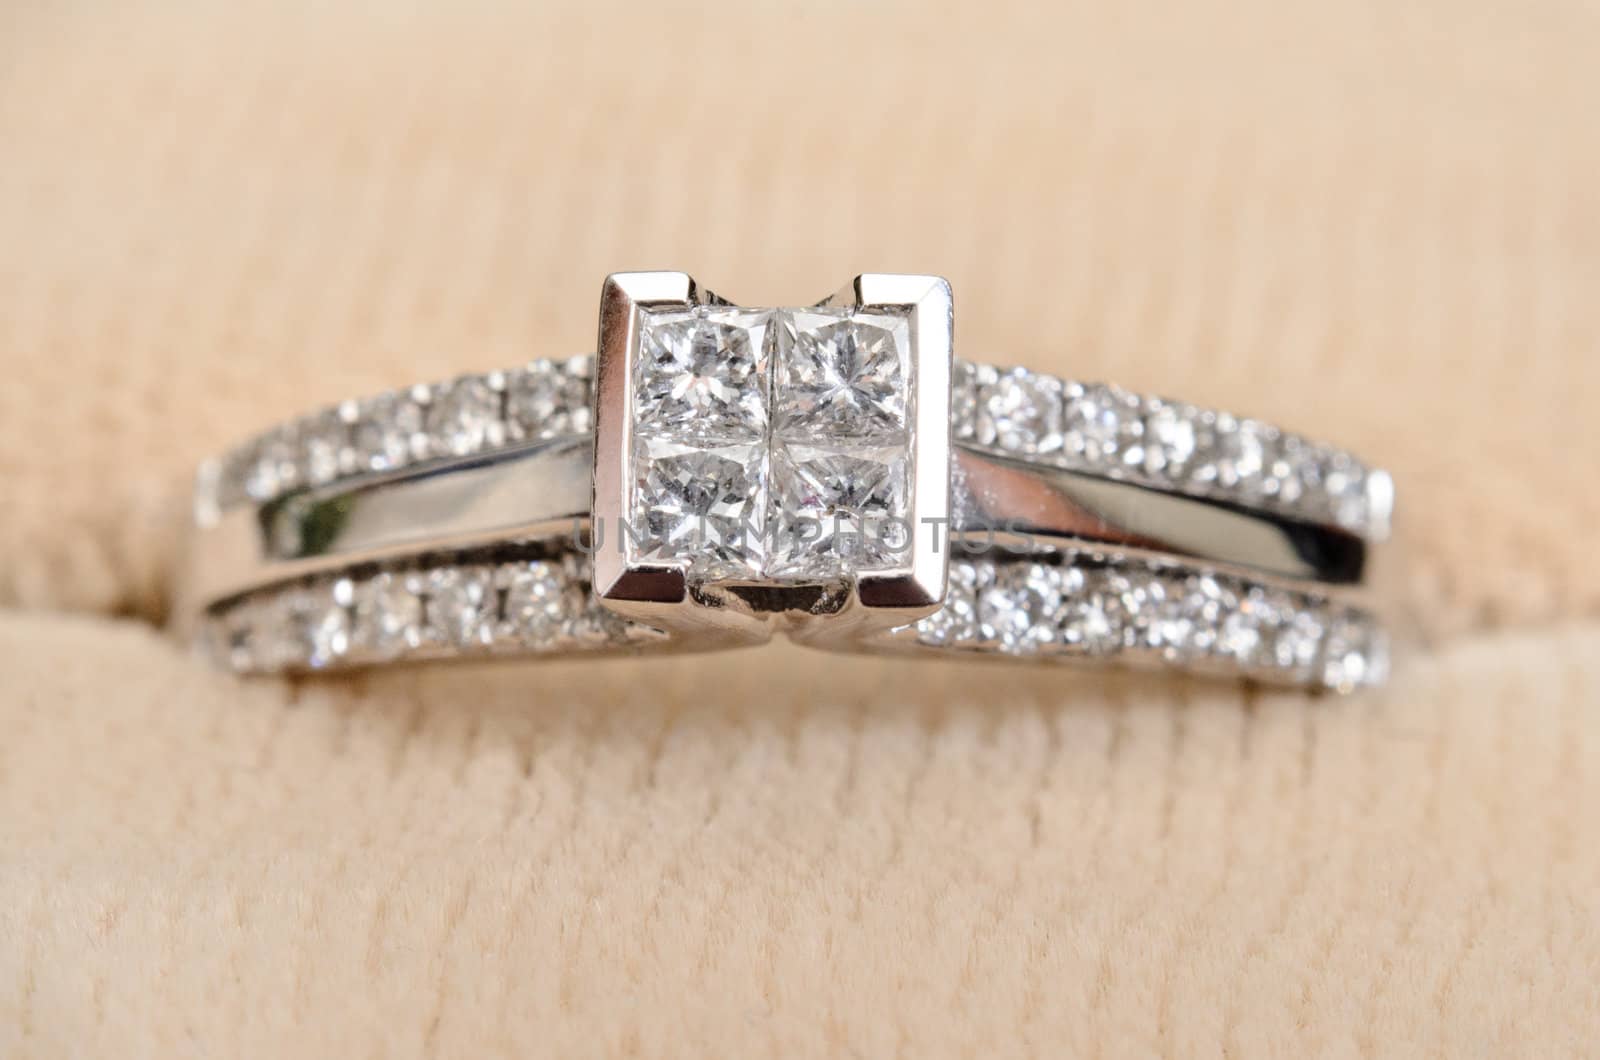 A closeup view of a diamond engagement ring, while sitting in the box.